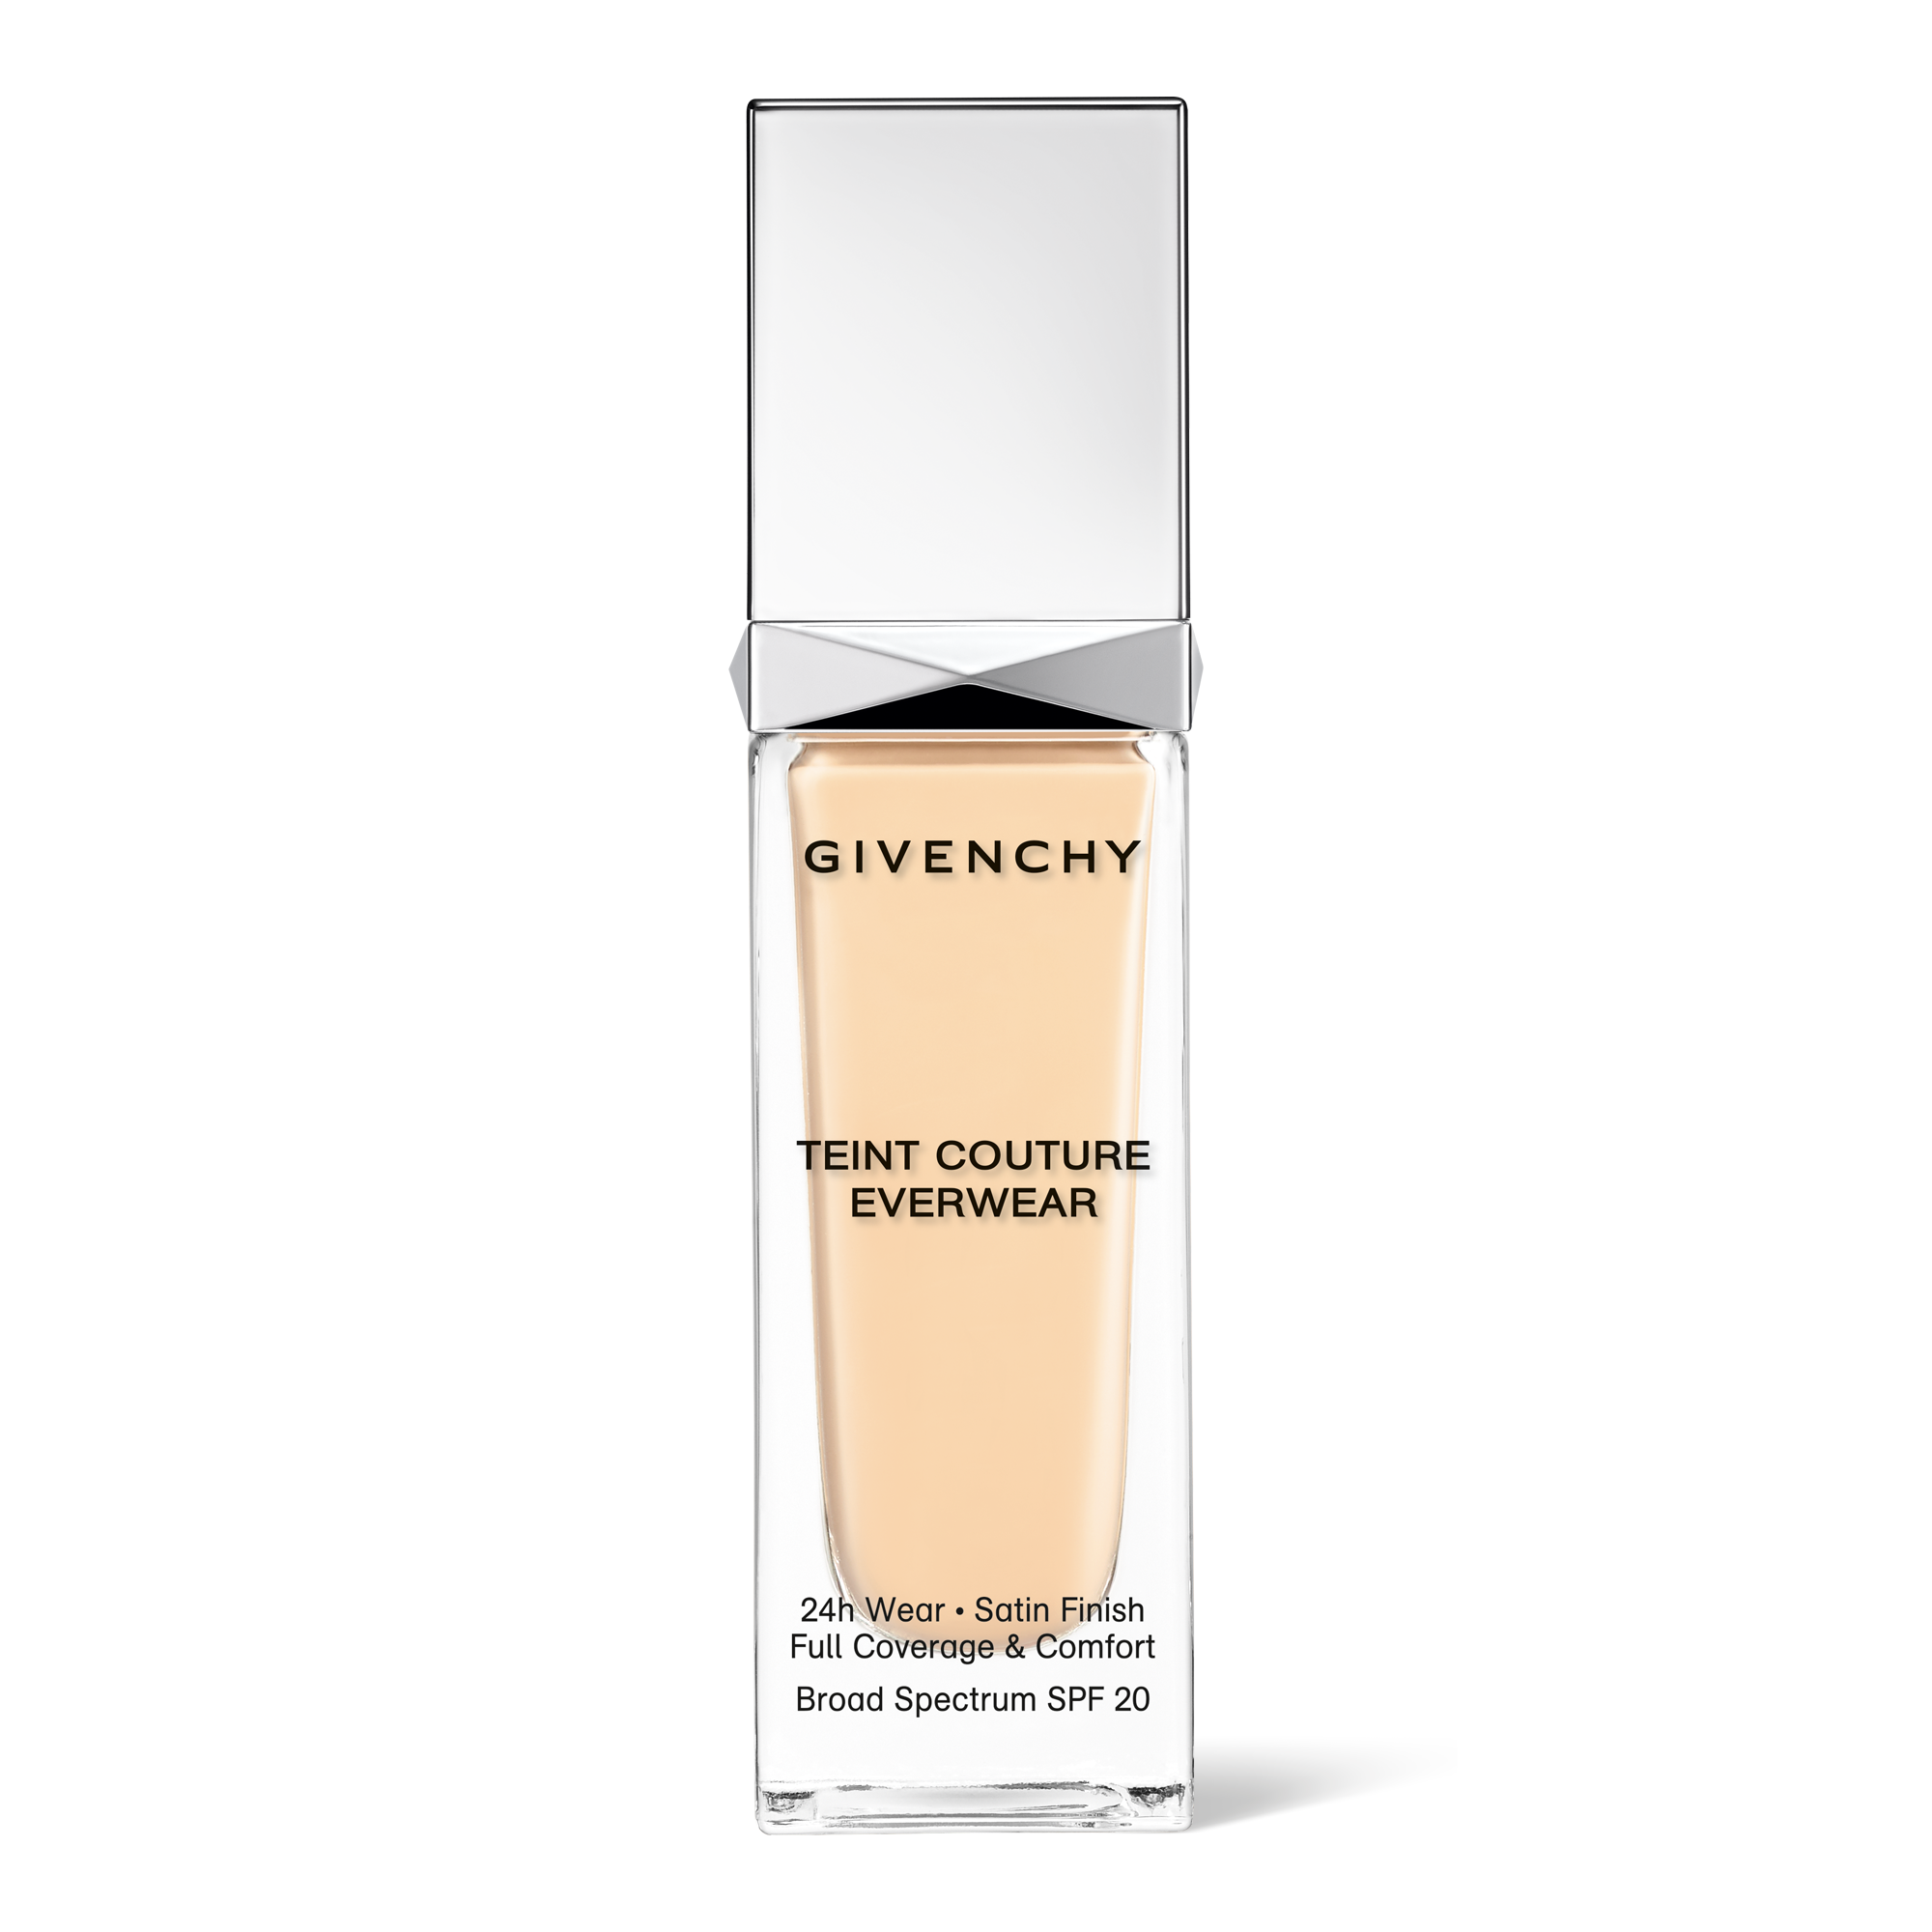 TEINT COUTURE EVERWEAR 24H FOUNDATION SPF 20 • 24H WEAR FULL COVERAGE SATIN  FINISH FOUNDATION SPF 20 ∷ GIVENCHY